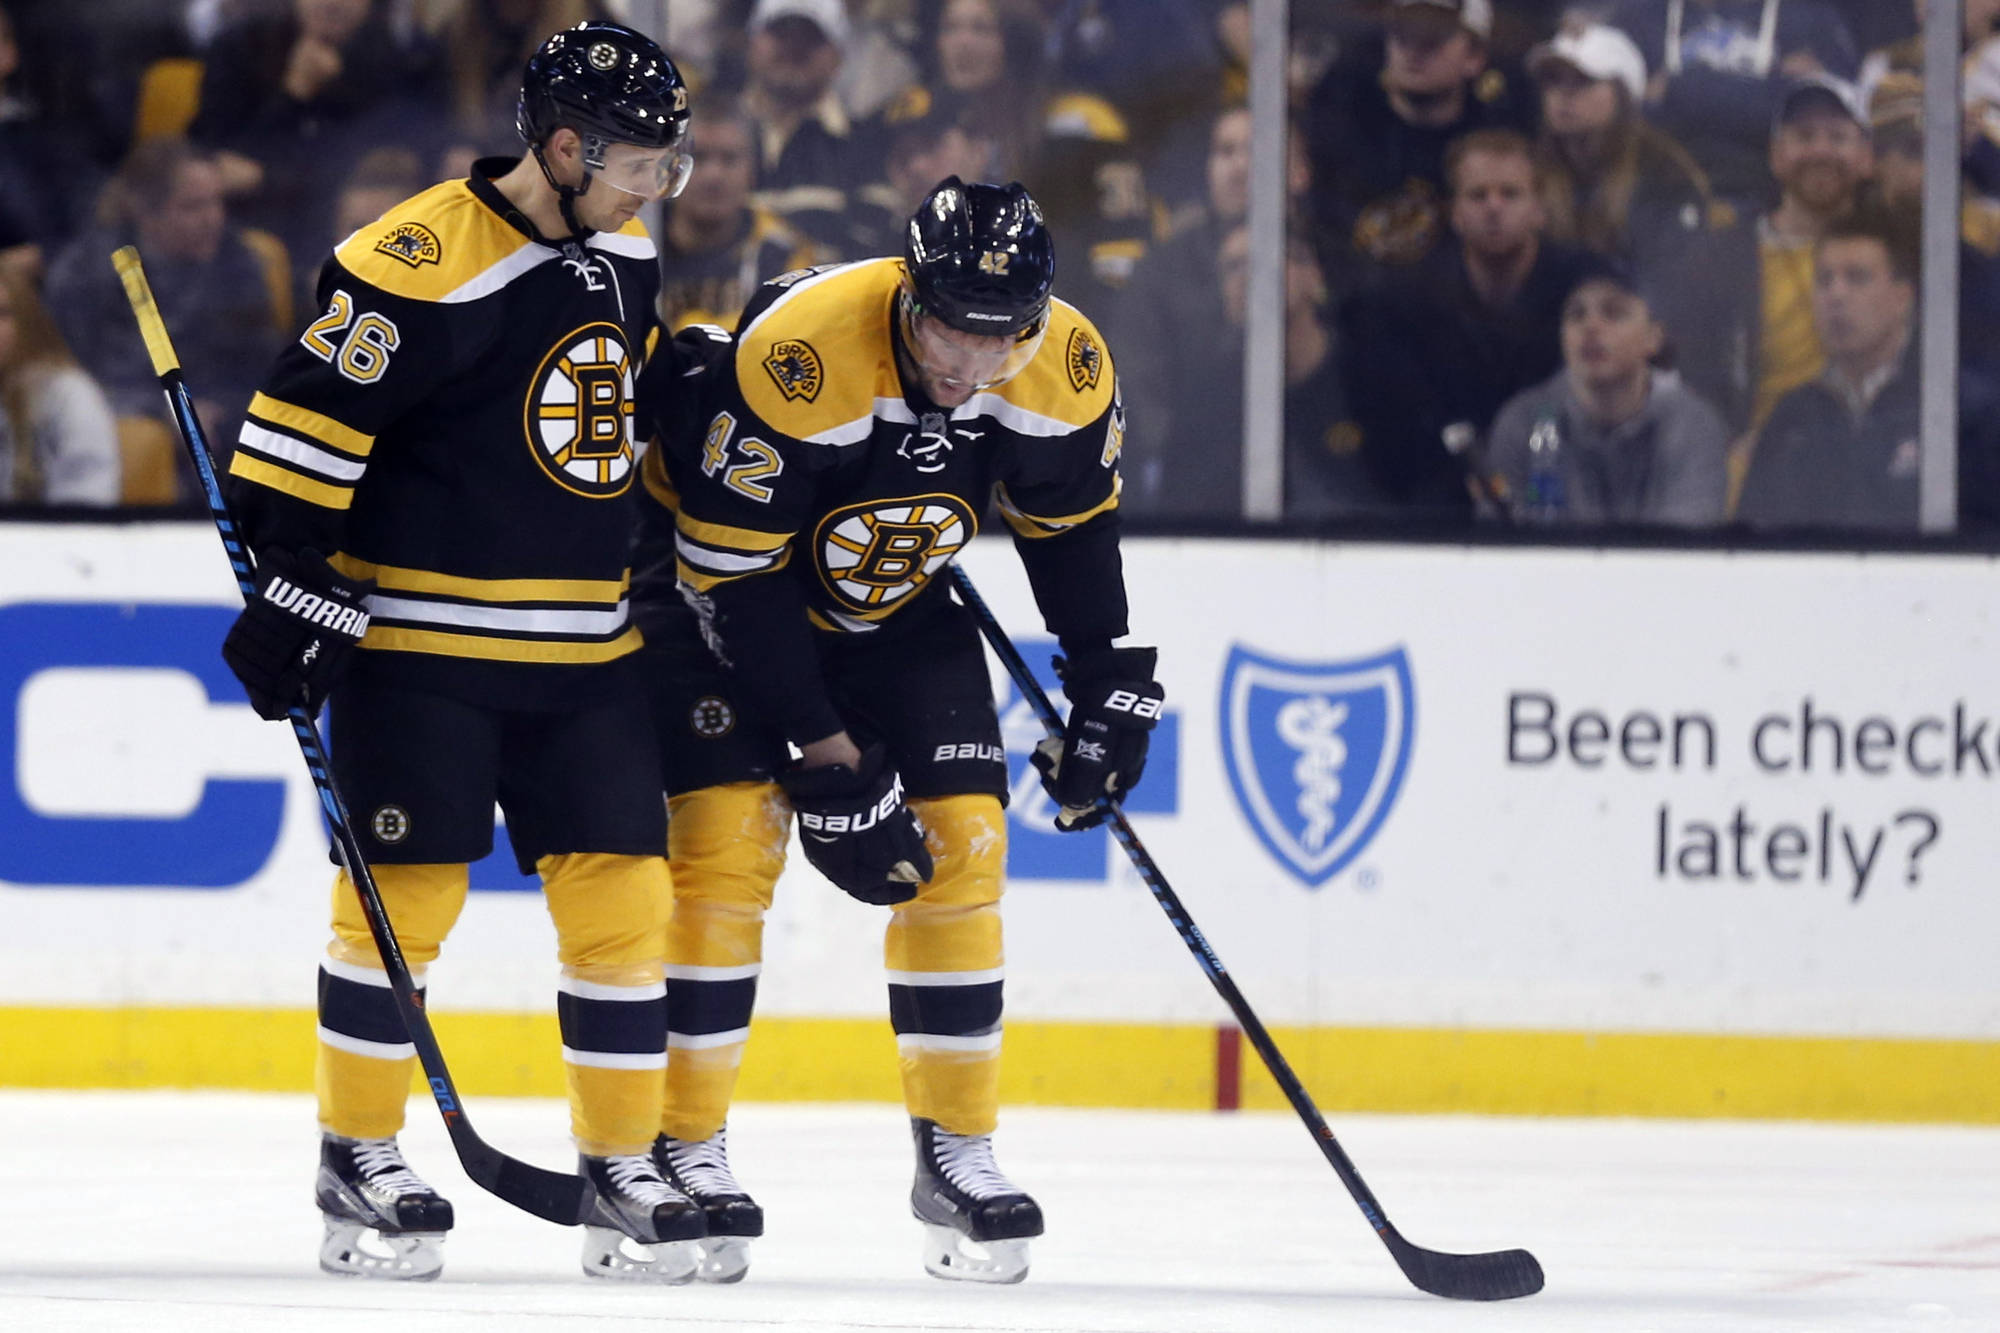 Bruins Power Play Bursts to Life in Thrashing of Sabres